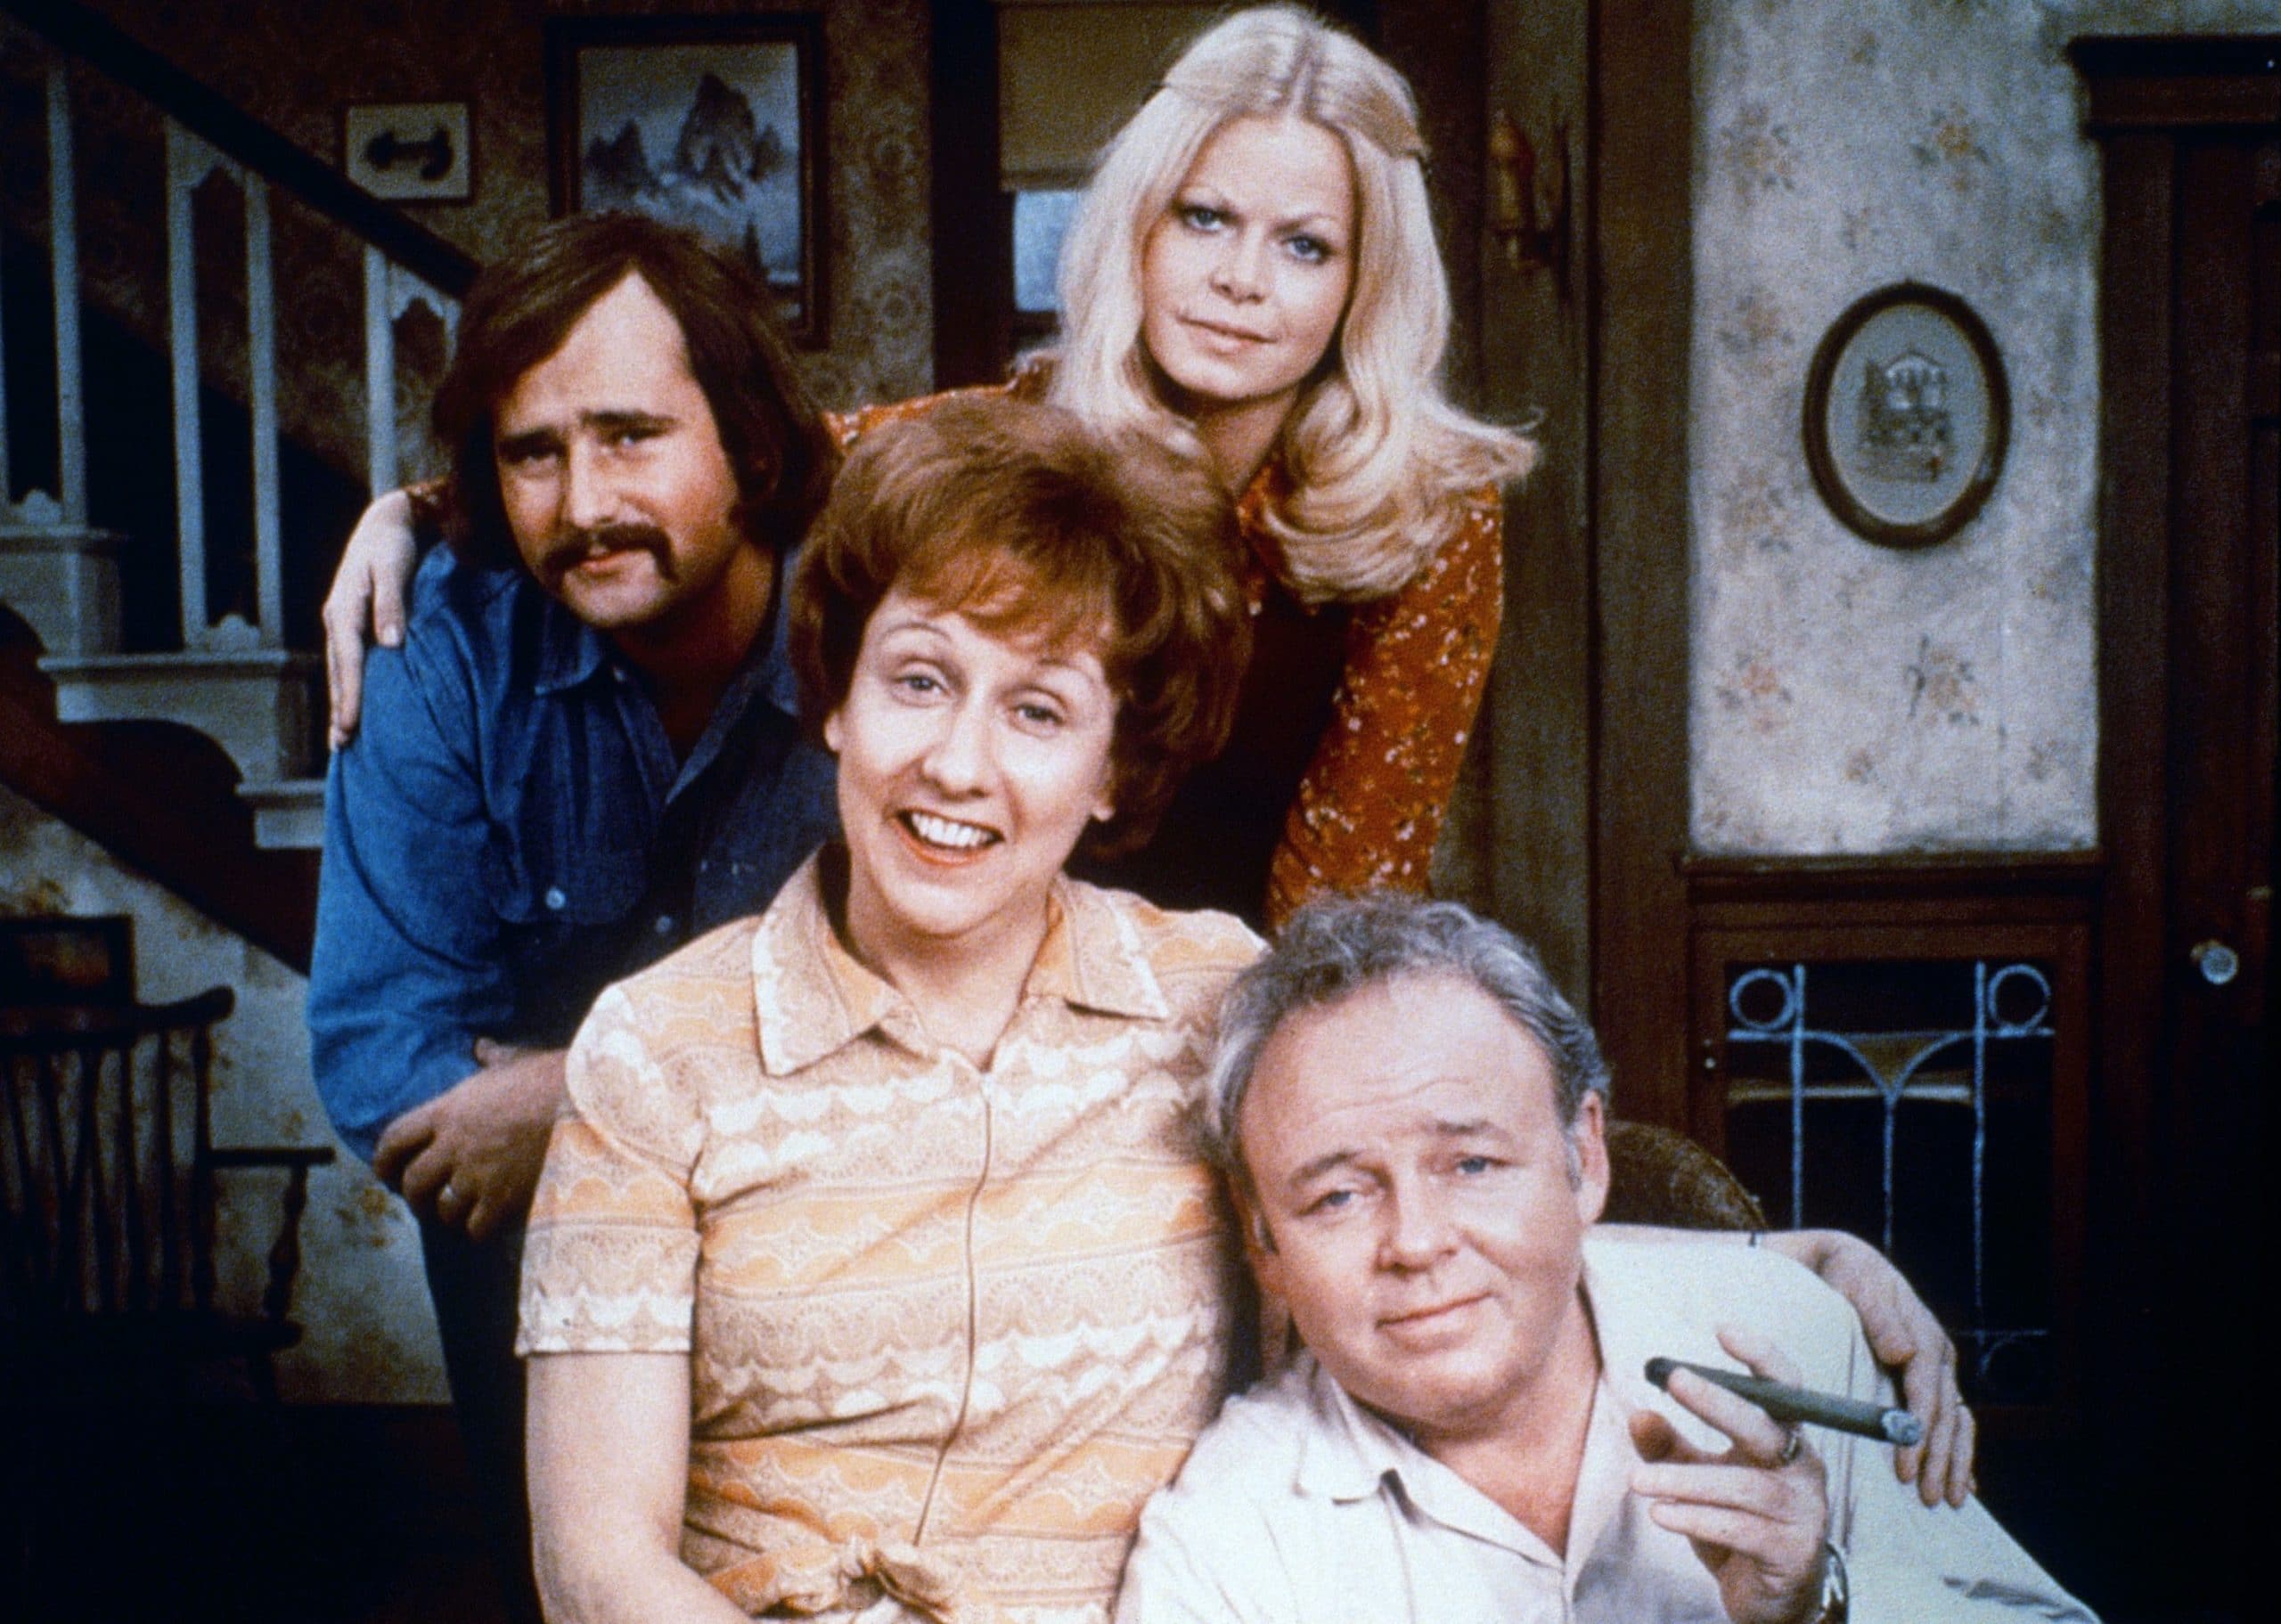 Those Were The Days! Celebrating 50 Years Of Norman Lear's 'All In The Family'